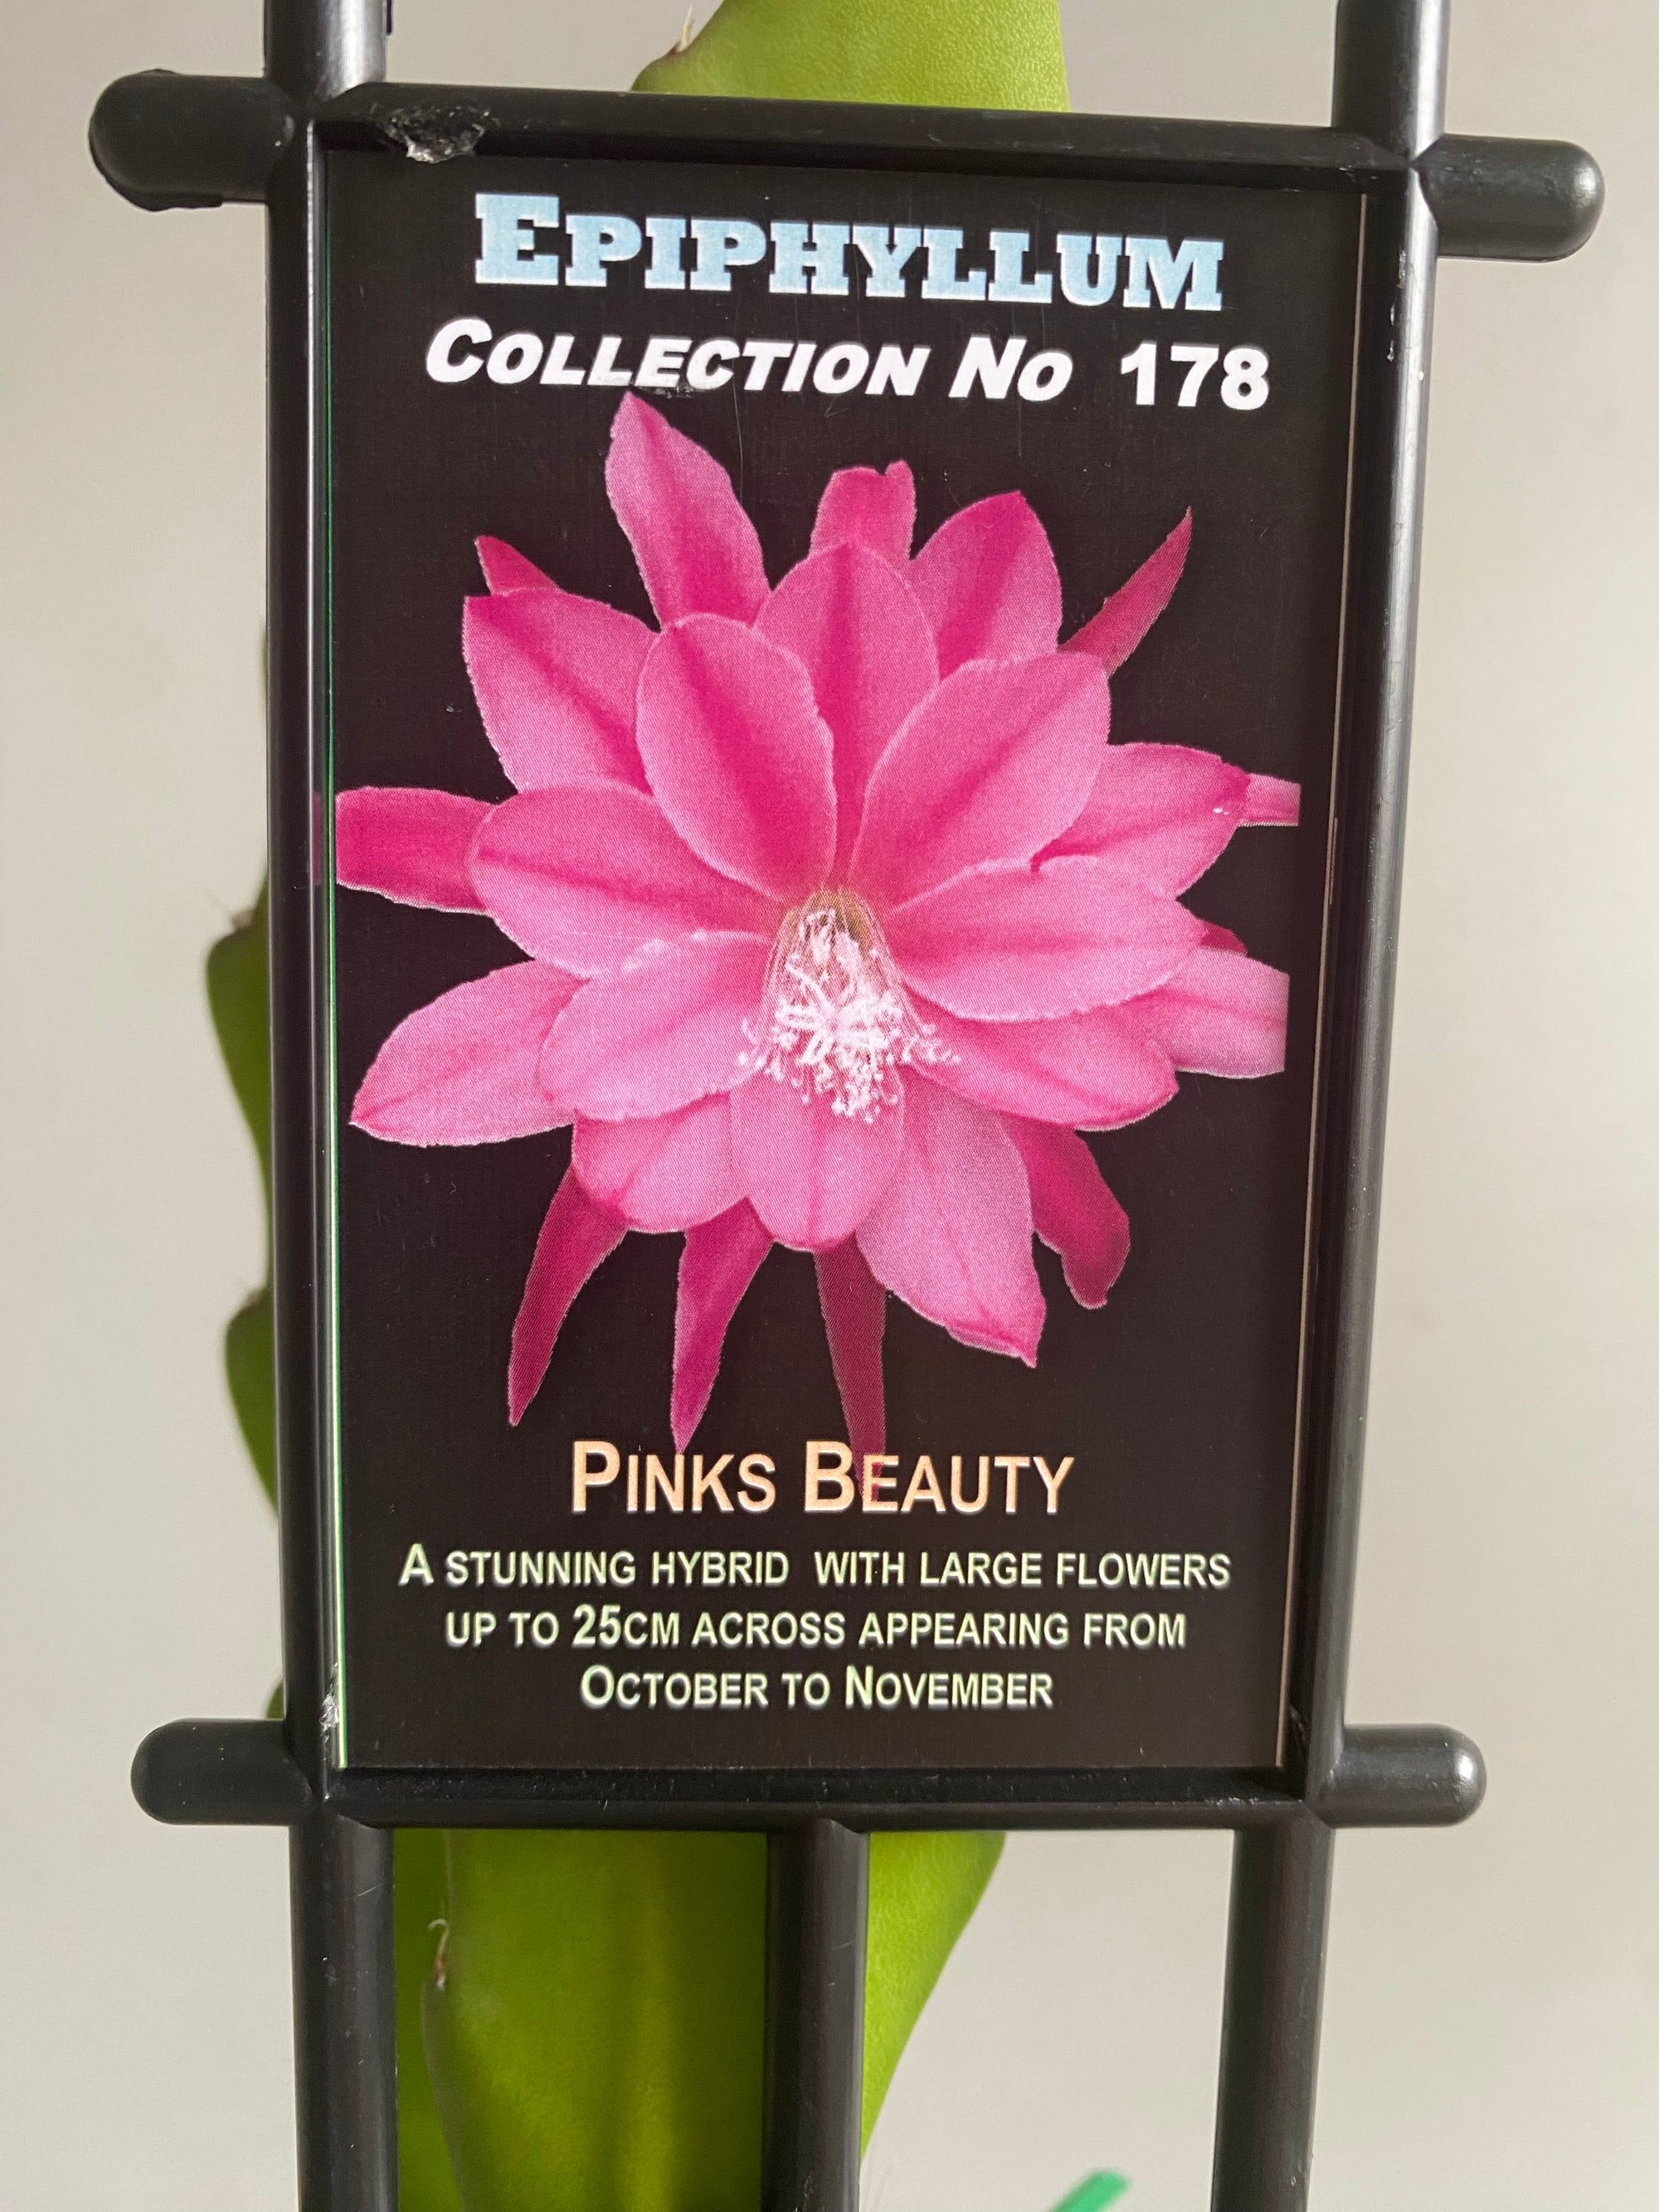 Epiphyllum 'Pinks Beauty' - Collection No. 178